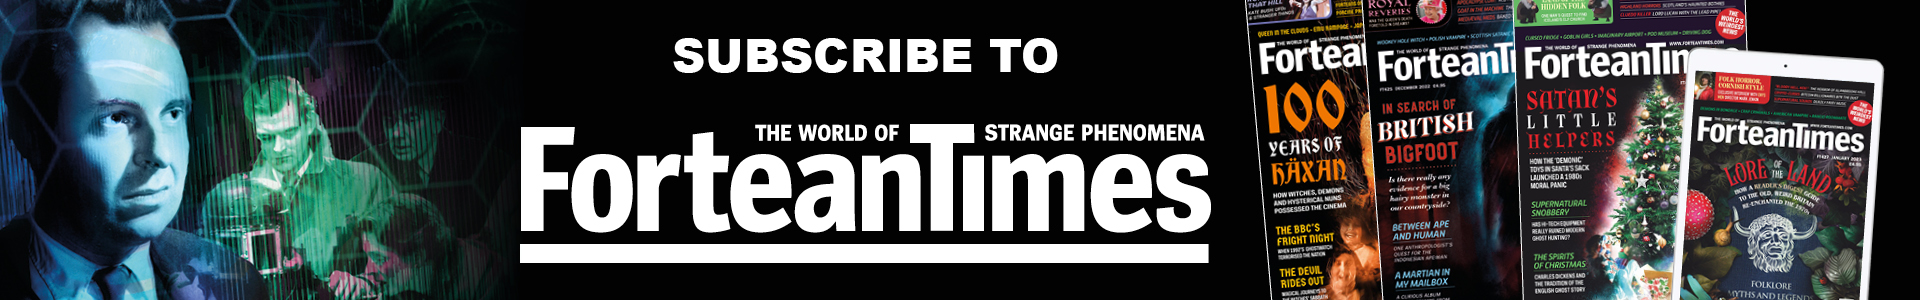 Subscribe to Fortean Times